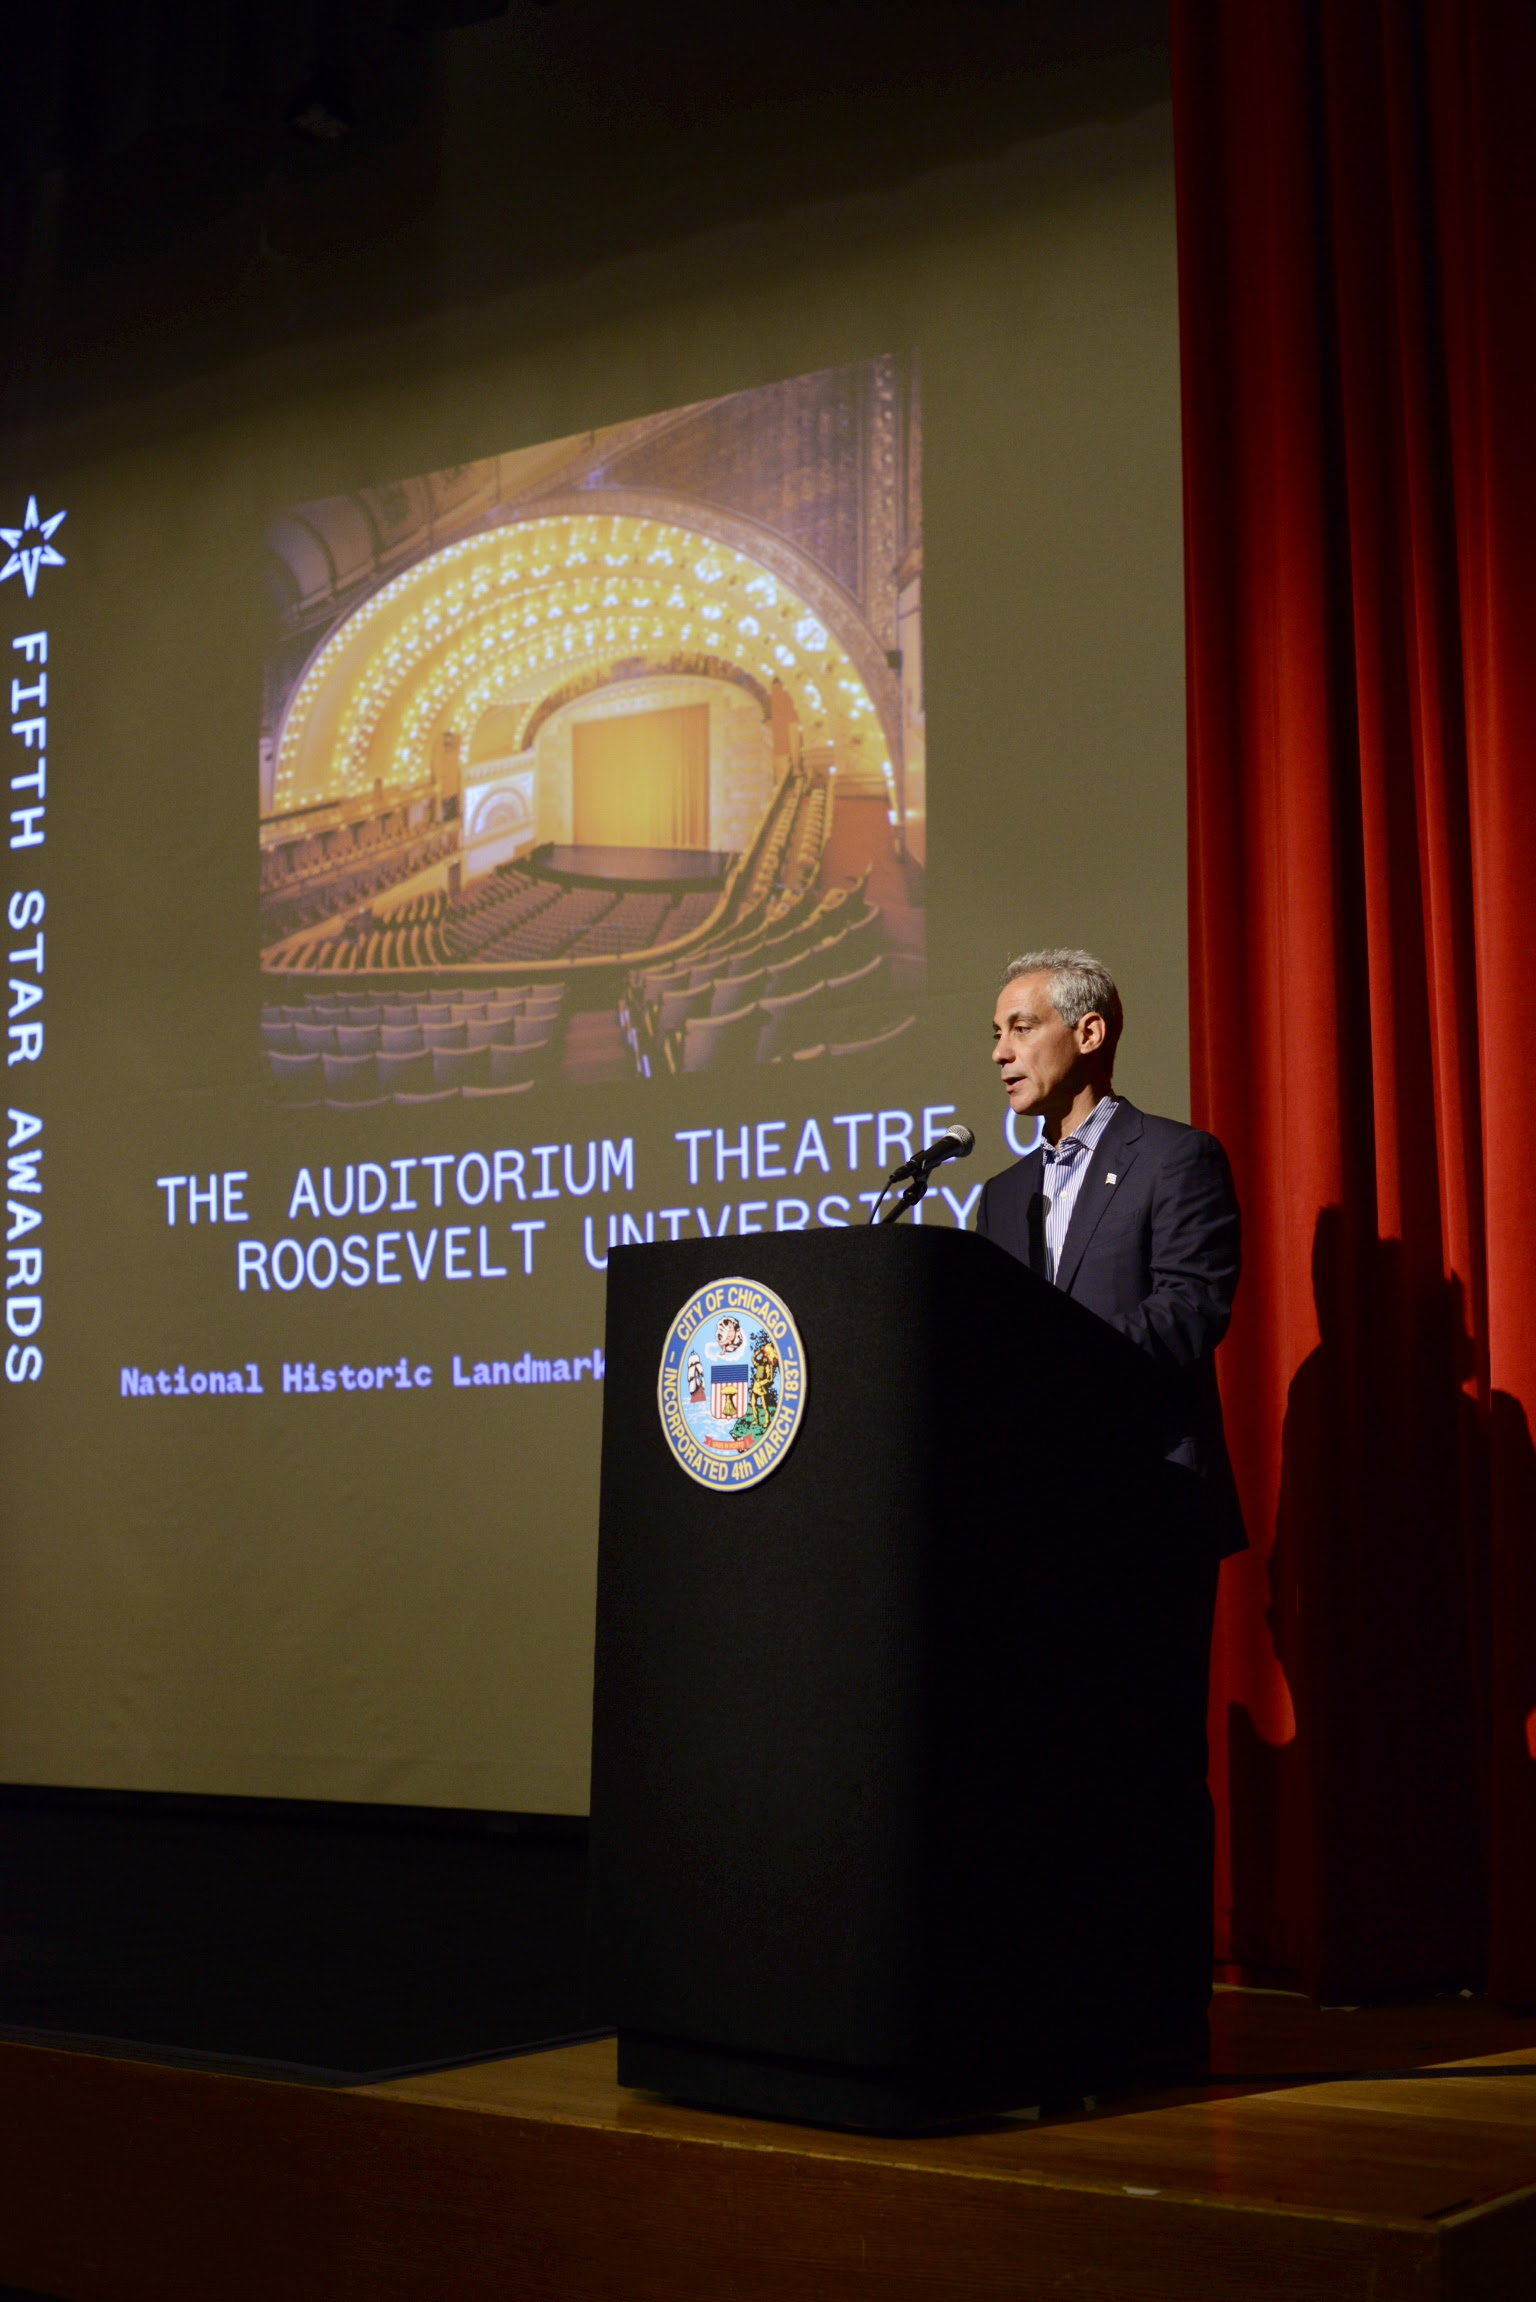 THE AUDITORIUM THEATRE OF ROOSEVELT UNIVERSITY NAMED AS CITY OF CHICAGO’S INAUGURAL FIFTH STAR AWARDS HONOREE 1 The Auditorium Theatre of Roosevelt University, celebrating their 125th Anniversary Season, has been chosen as one of five honorees for the City of Chicago and the Chicago Department of Cultural Affairs and Special Events (DCASE) inaugural Fifth Star Awards, celebrating the city’s creativity through artists, arts advocates and cultural institutions. The free public celebration, also honoring dancer Lou Conte, artist Richard Hunt, Grammy-winning composer, pianist and radio personality Ramsey Lewis and arts advocate Lois Weisberg, will be held on Wednesday, Sept. 17 at 7:00 pm at the Jay Pritzker Pavilion in Millennium Park (201 E. Randolph St.) and will feature live performances and tributes throughout the evening.